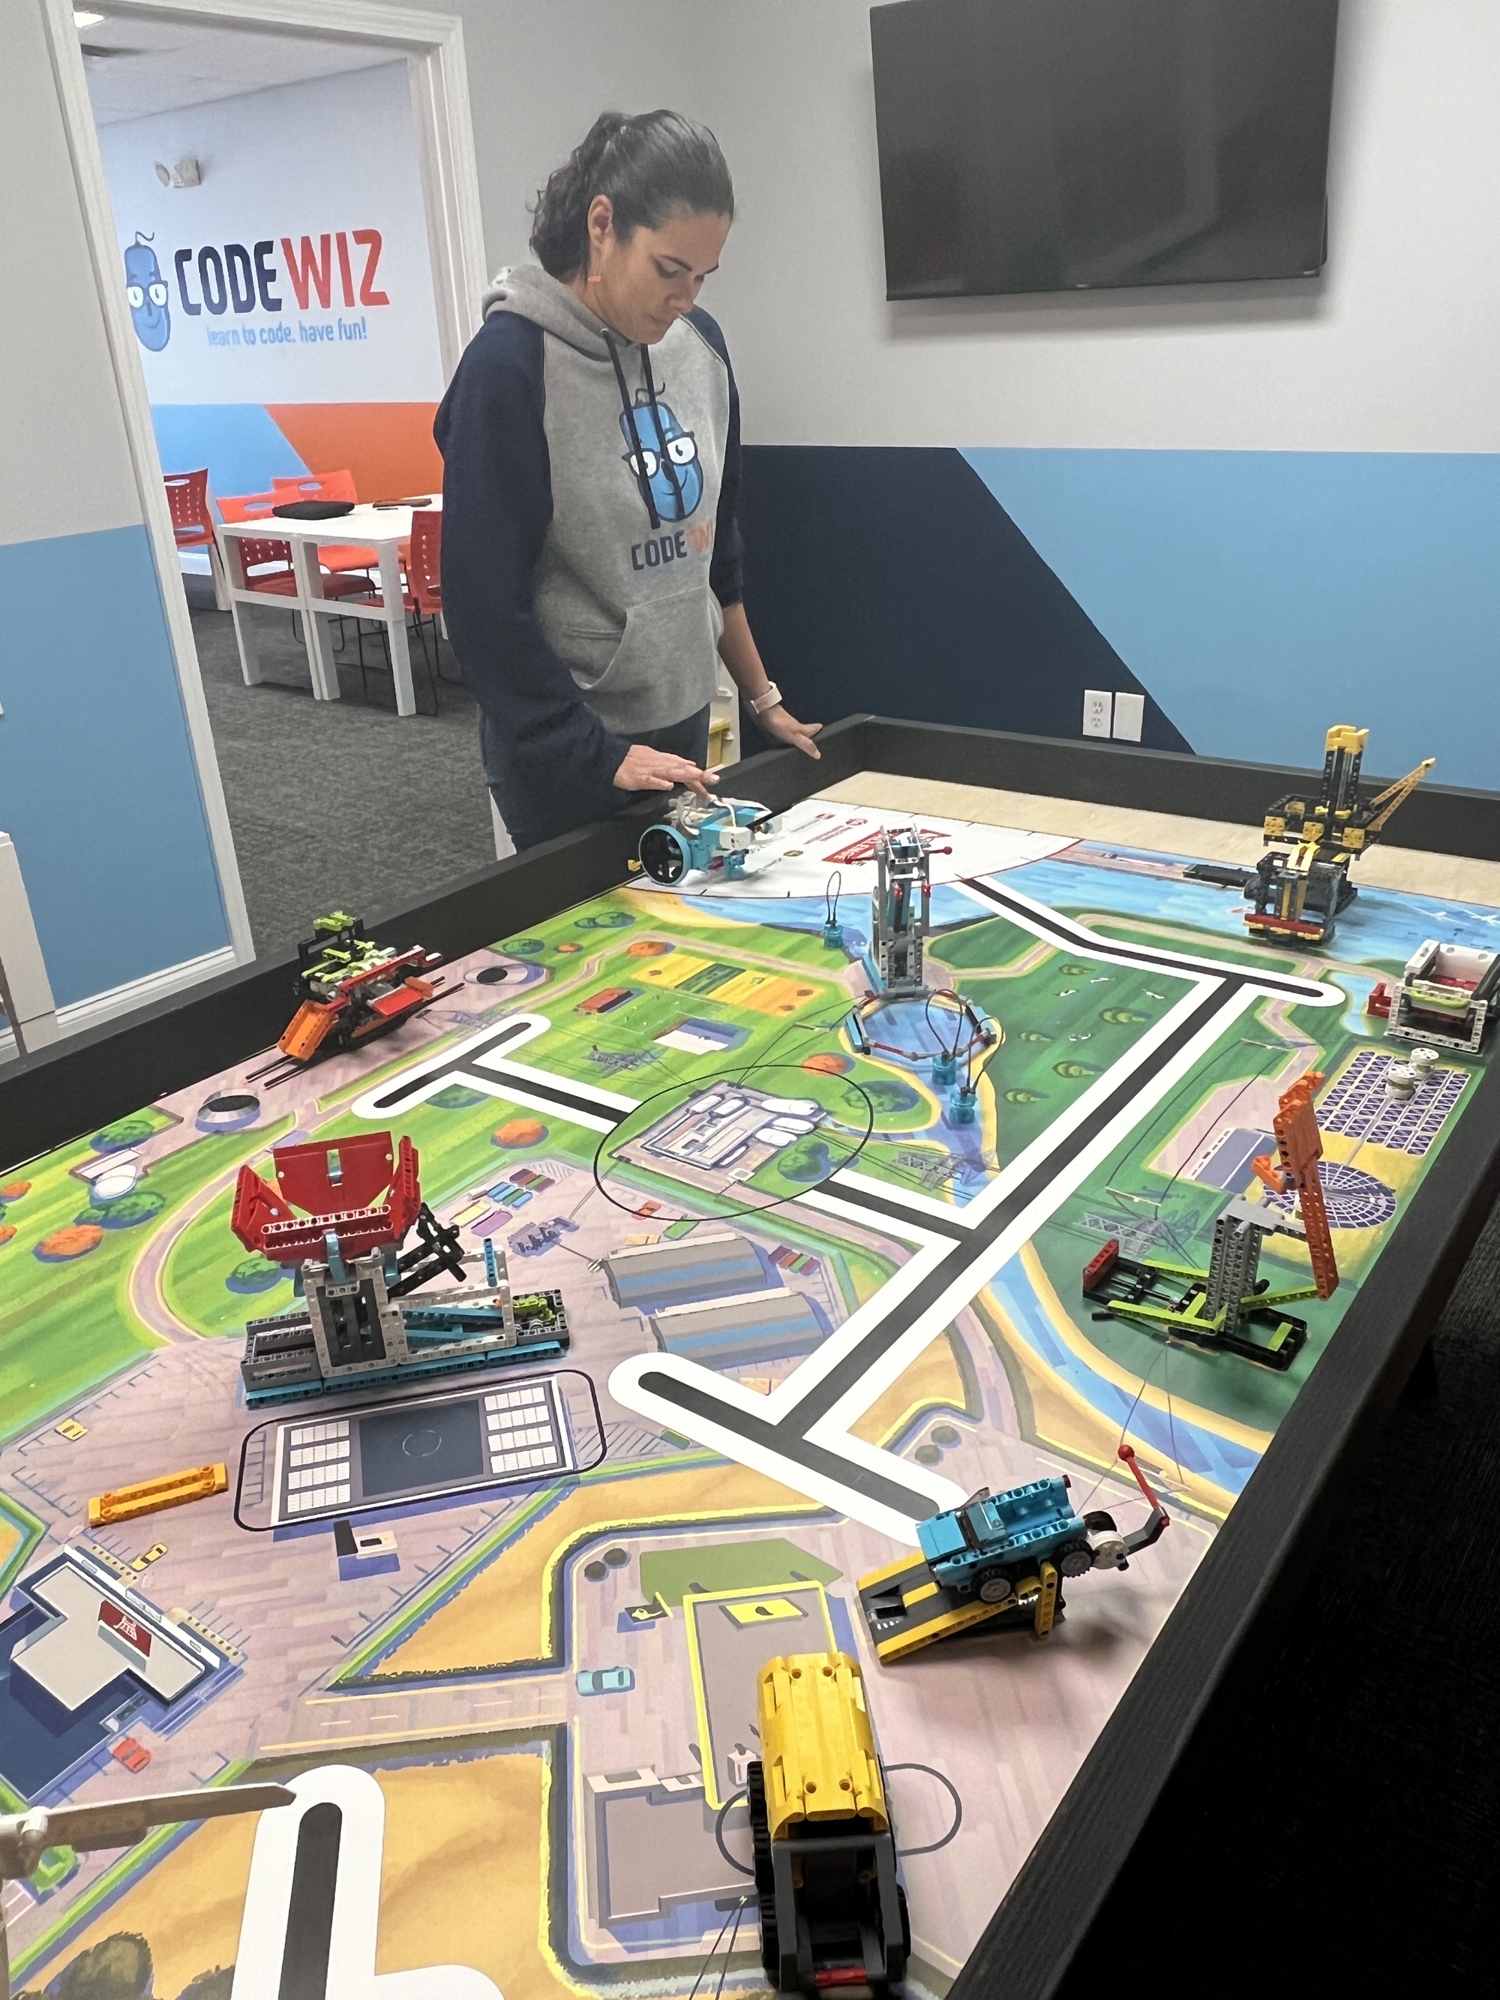 Code Wiz began in Westford, Massachusetts, in 2017. It teaches children ages 7 to 17 how to write computer code and apply it to robotics and computers.